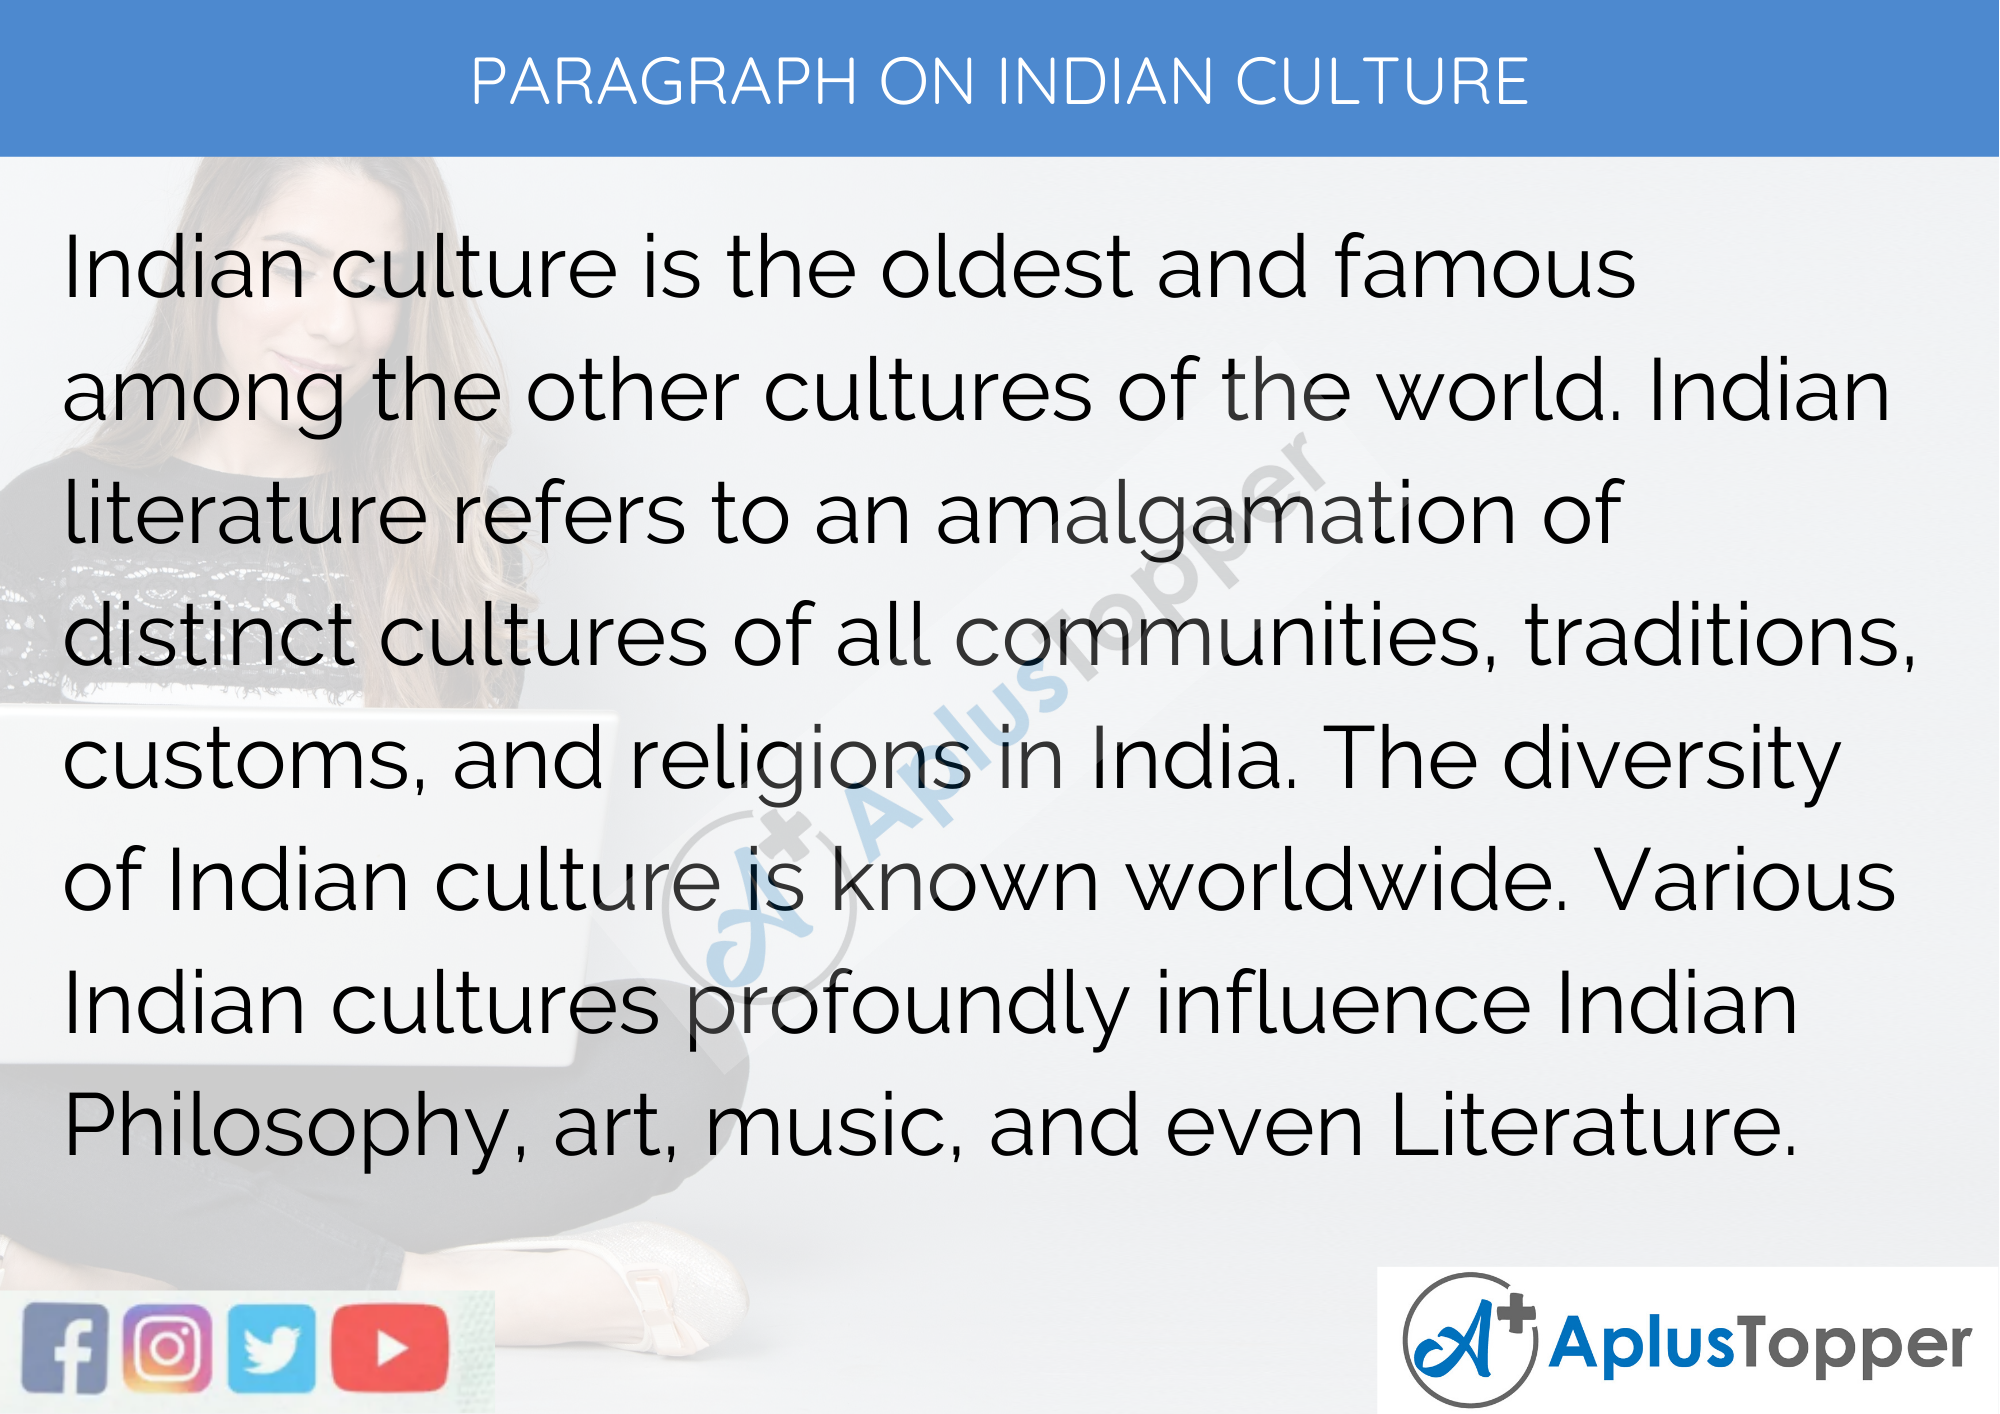 Paragraph on Indian Culture - 100 Words for Classes 1, 2, and 3 Kids